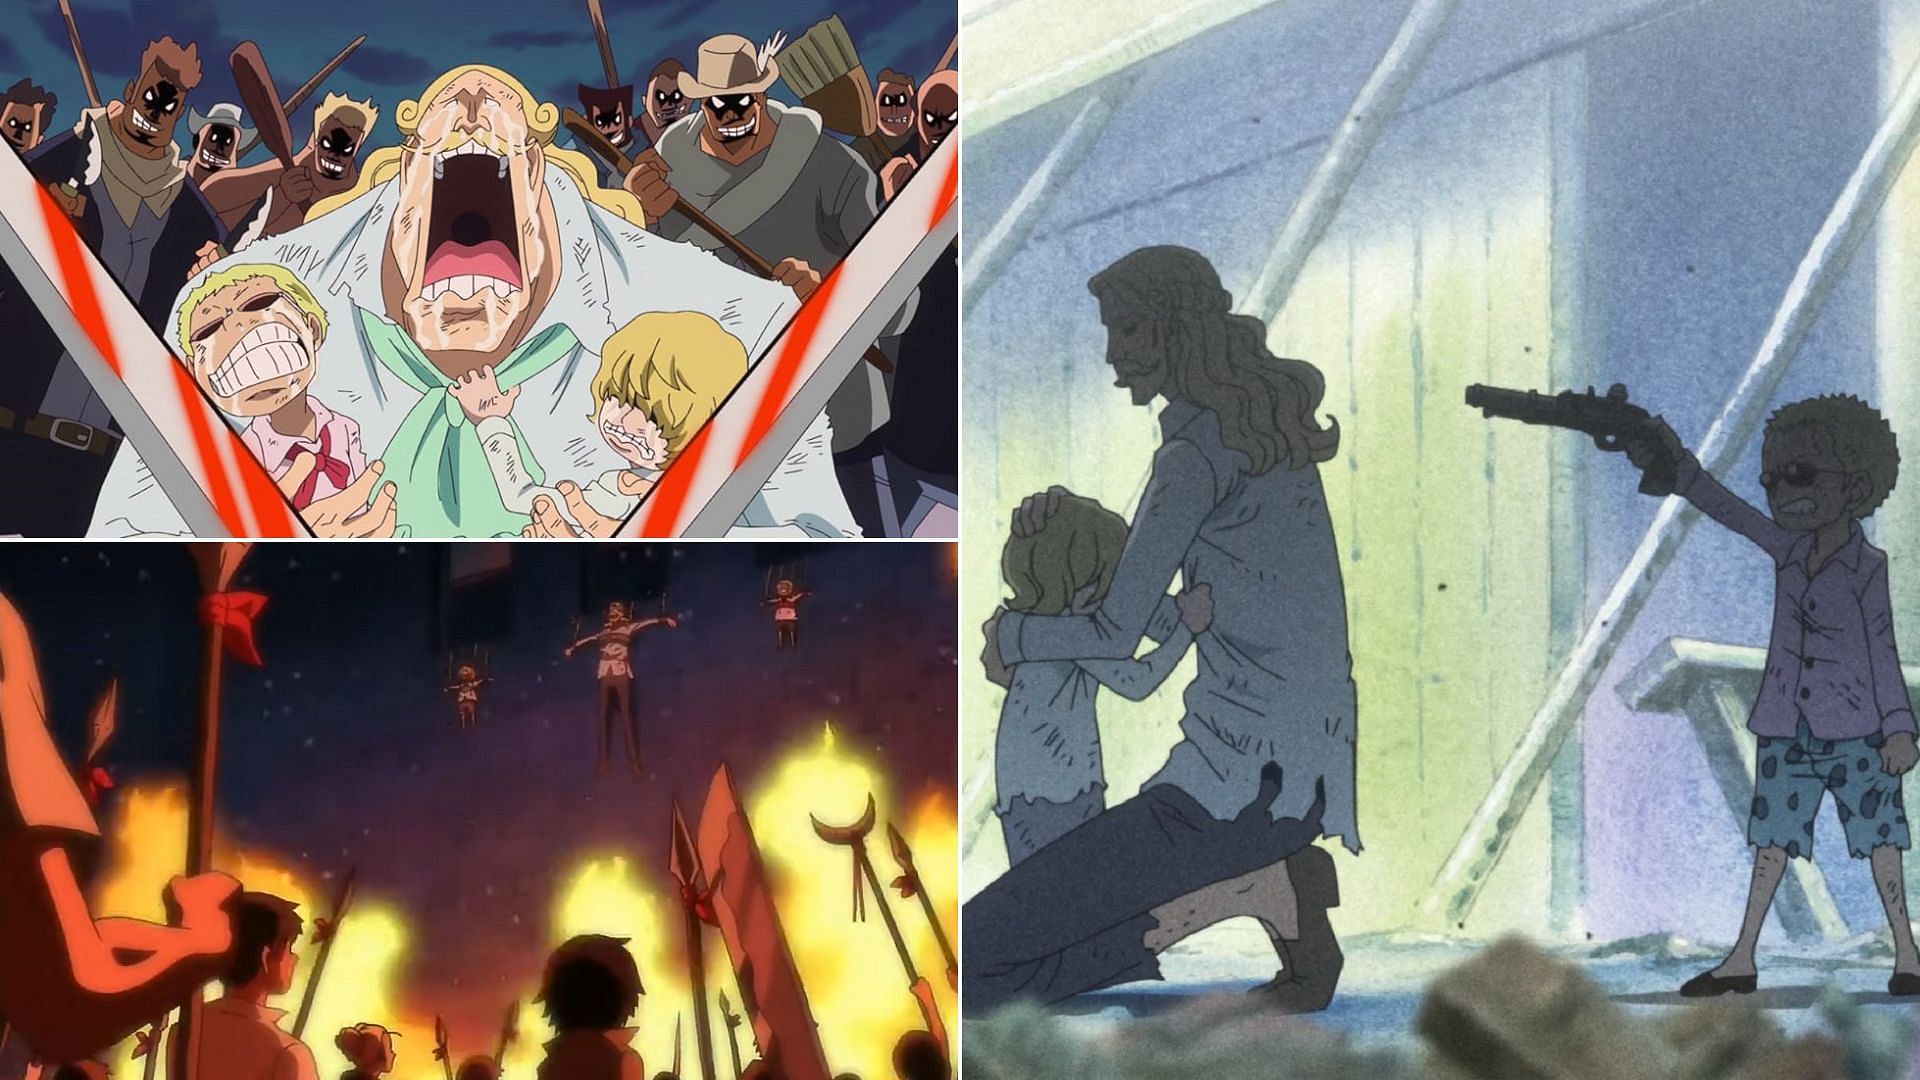 Homing ended up killed by his son (Image via Toei Animation, One Piece)